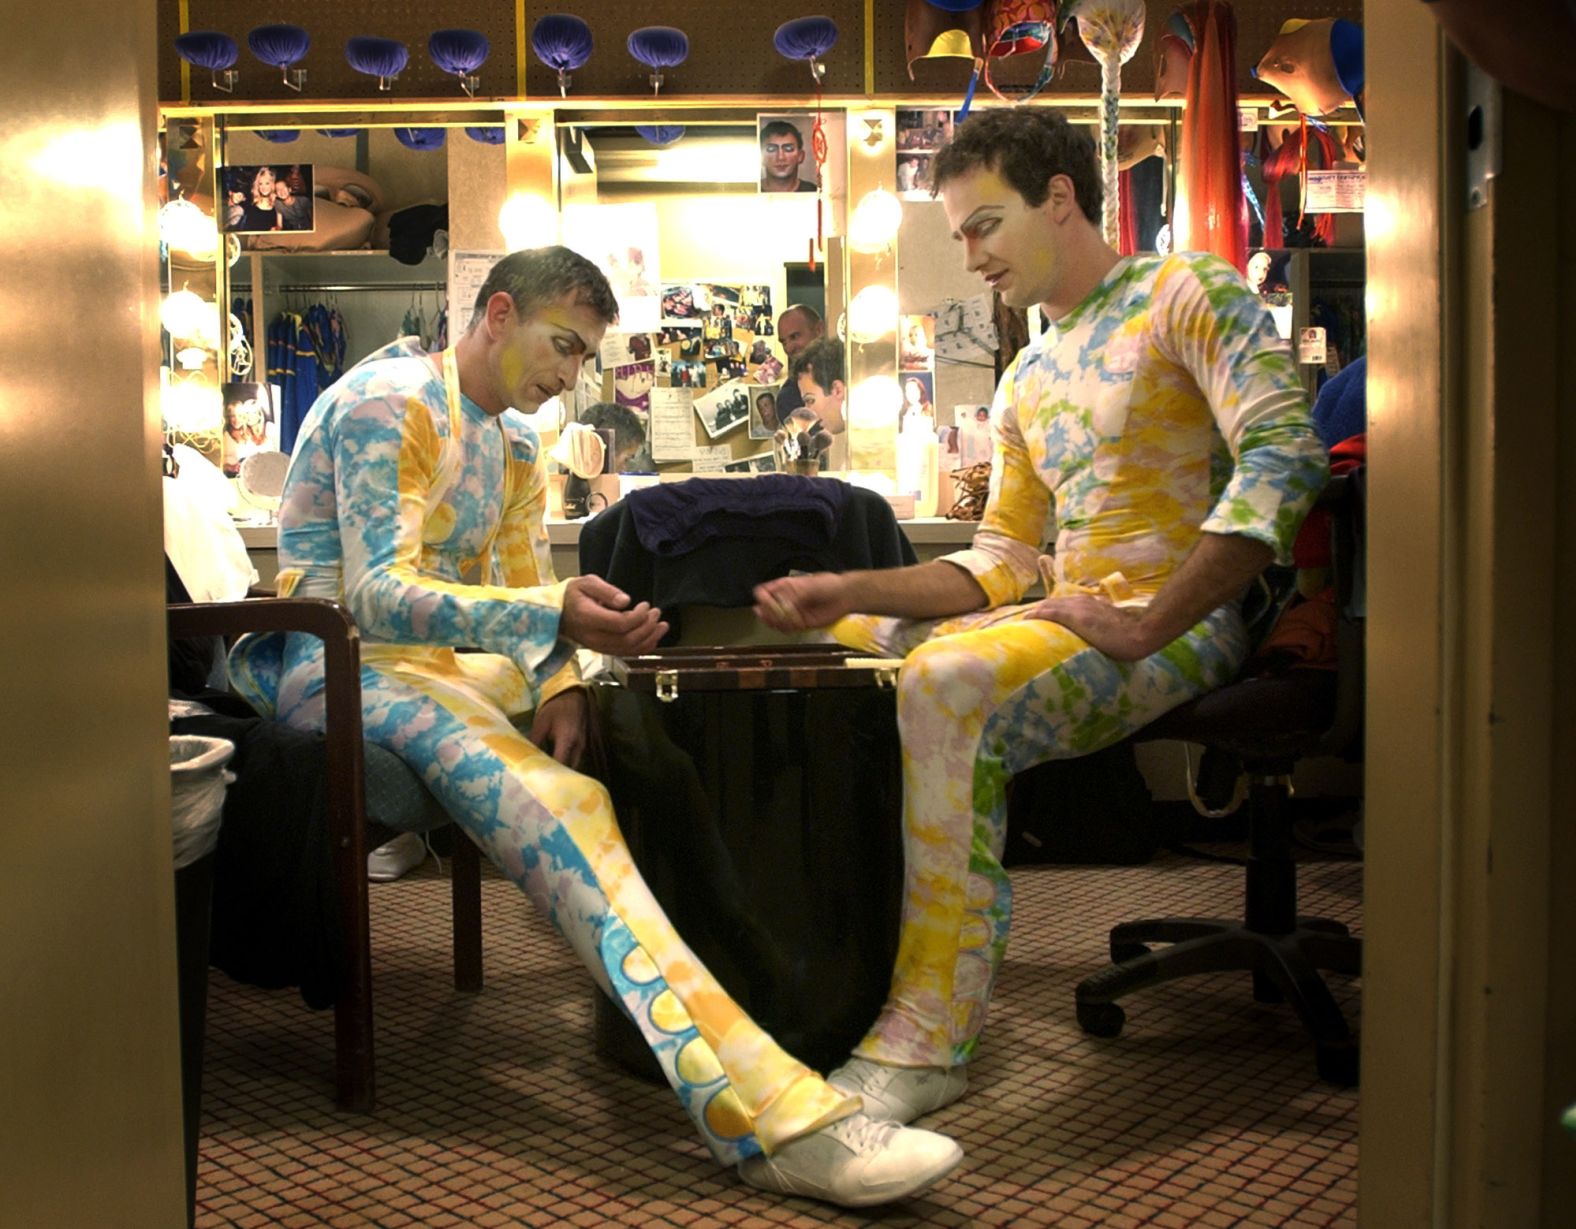 Eligiusz Skoczylas, left, and Paul Cameron — two stars of the Cirque du Soleil show "Mystère" — play backgammon backstage in 2004.